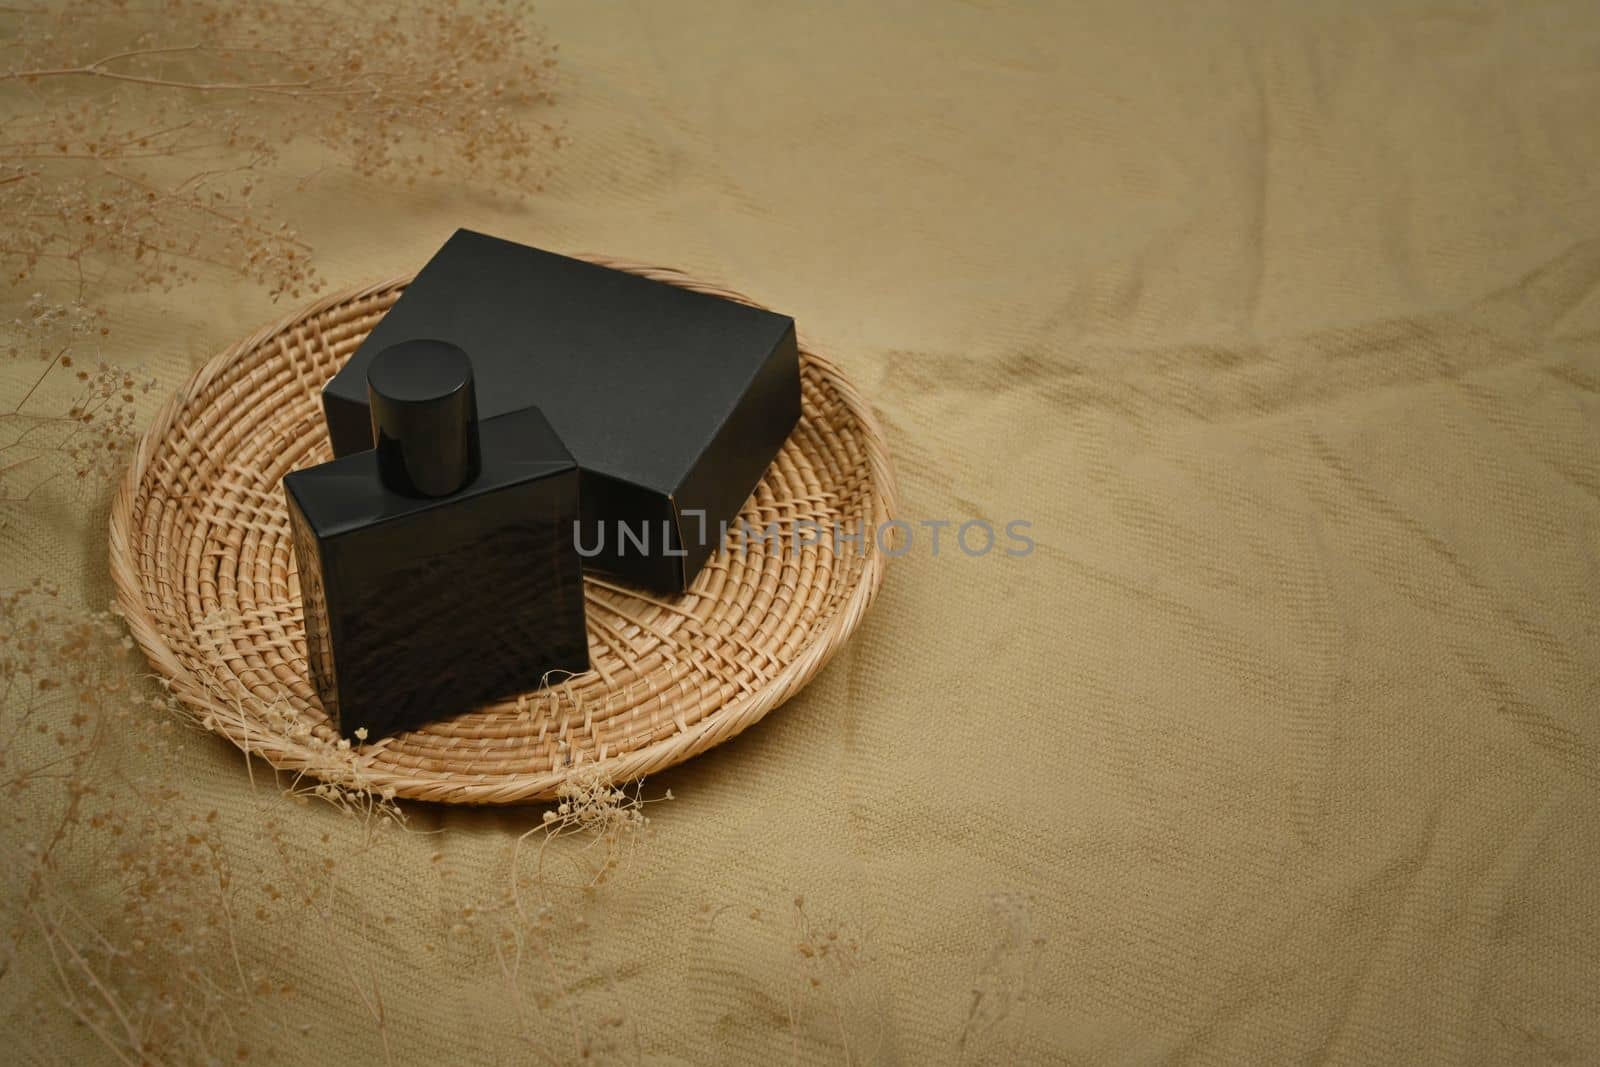 Mockup of fragrance perfume bottle on round rattan basket. Products design and branding concept.